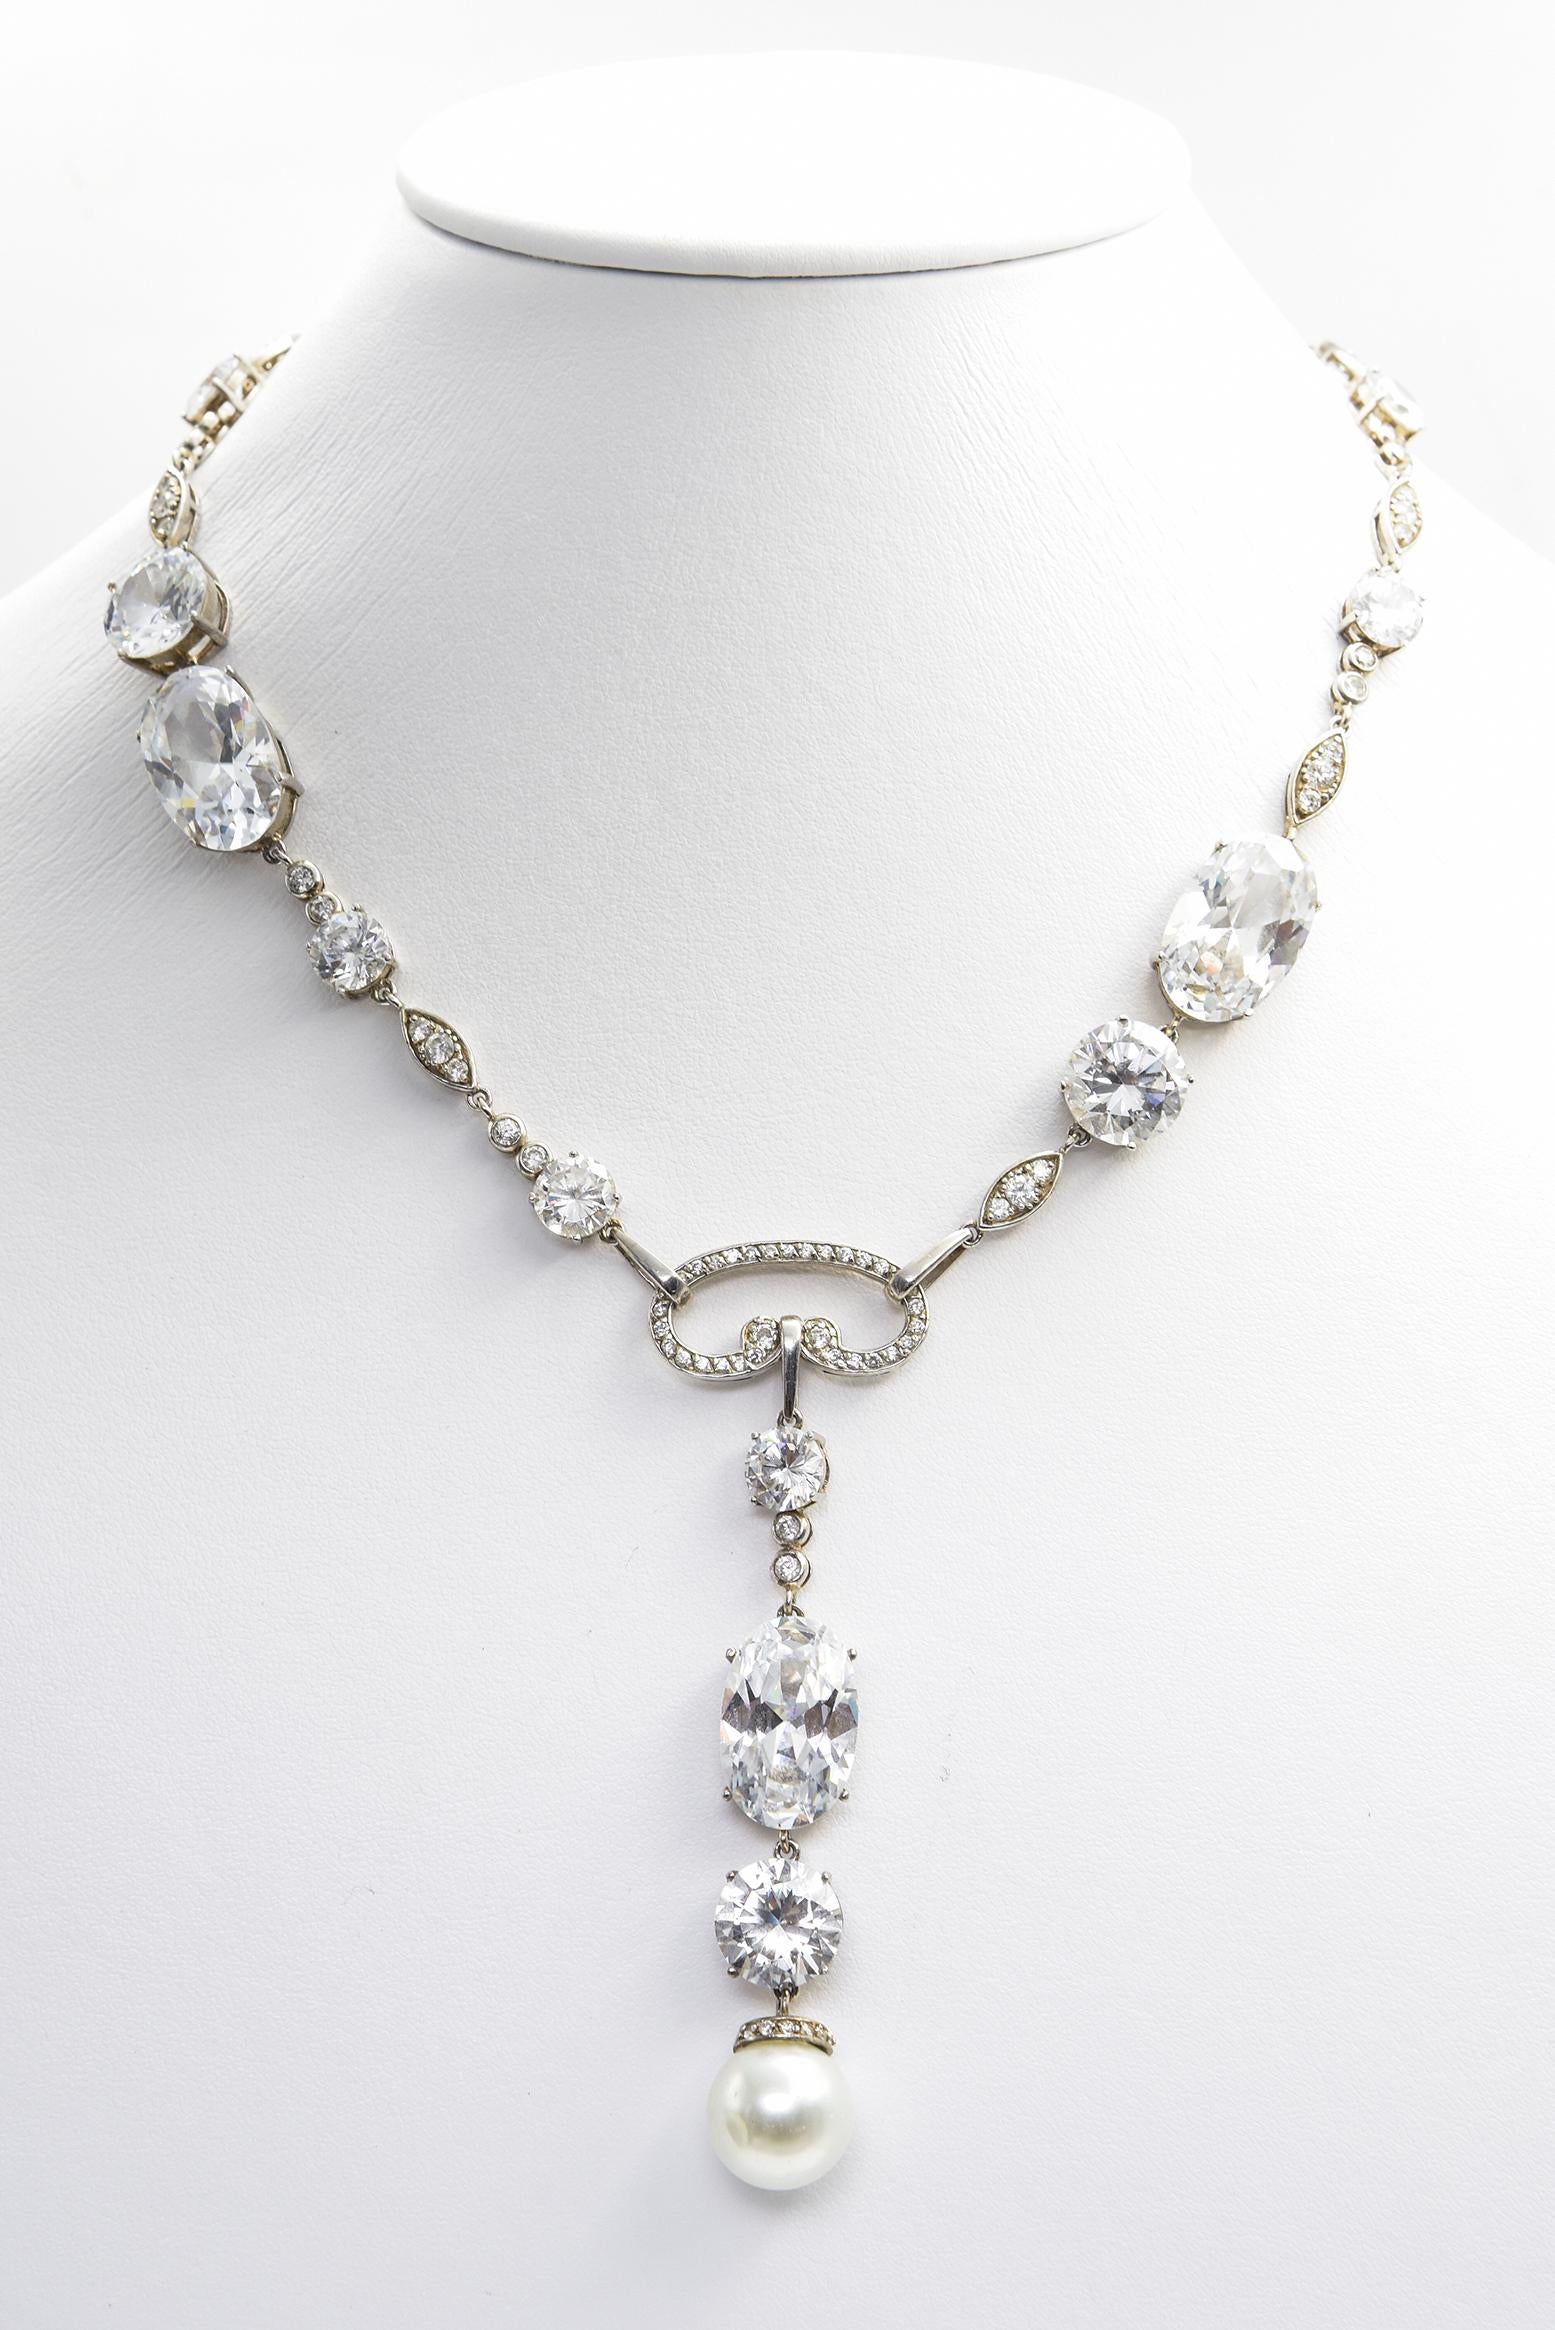 Impressive sterling silver necklace featuring a mixture of large prong set round and oval CZs accented by smaller bezel set CZ crystals and CZs in navette shaped links in the top 16